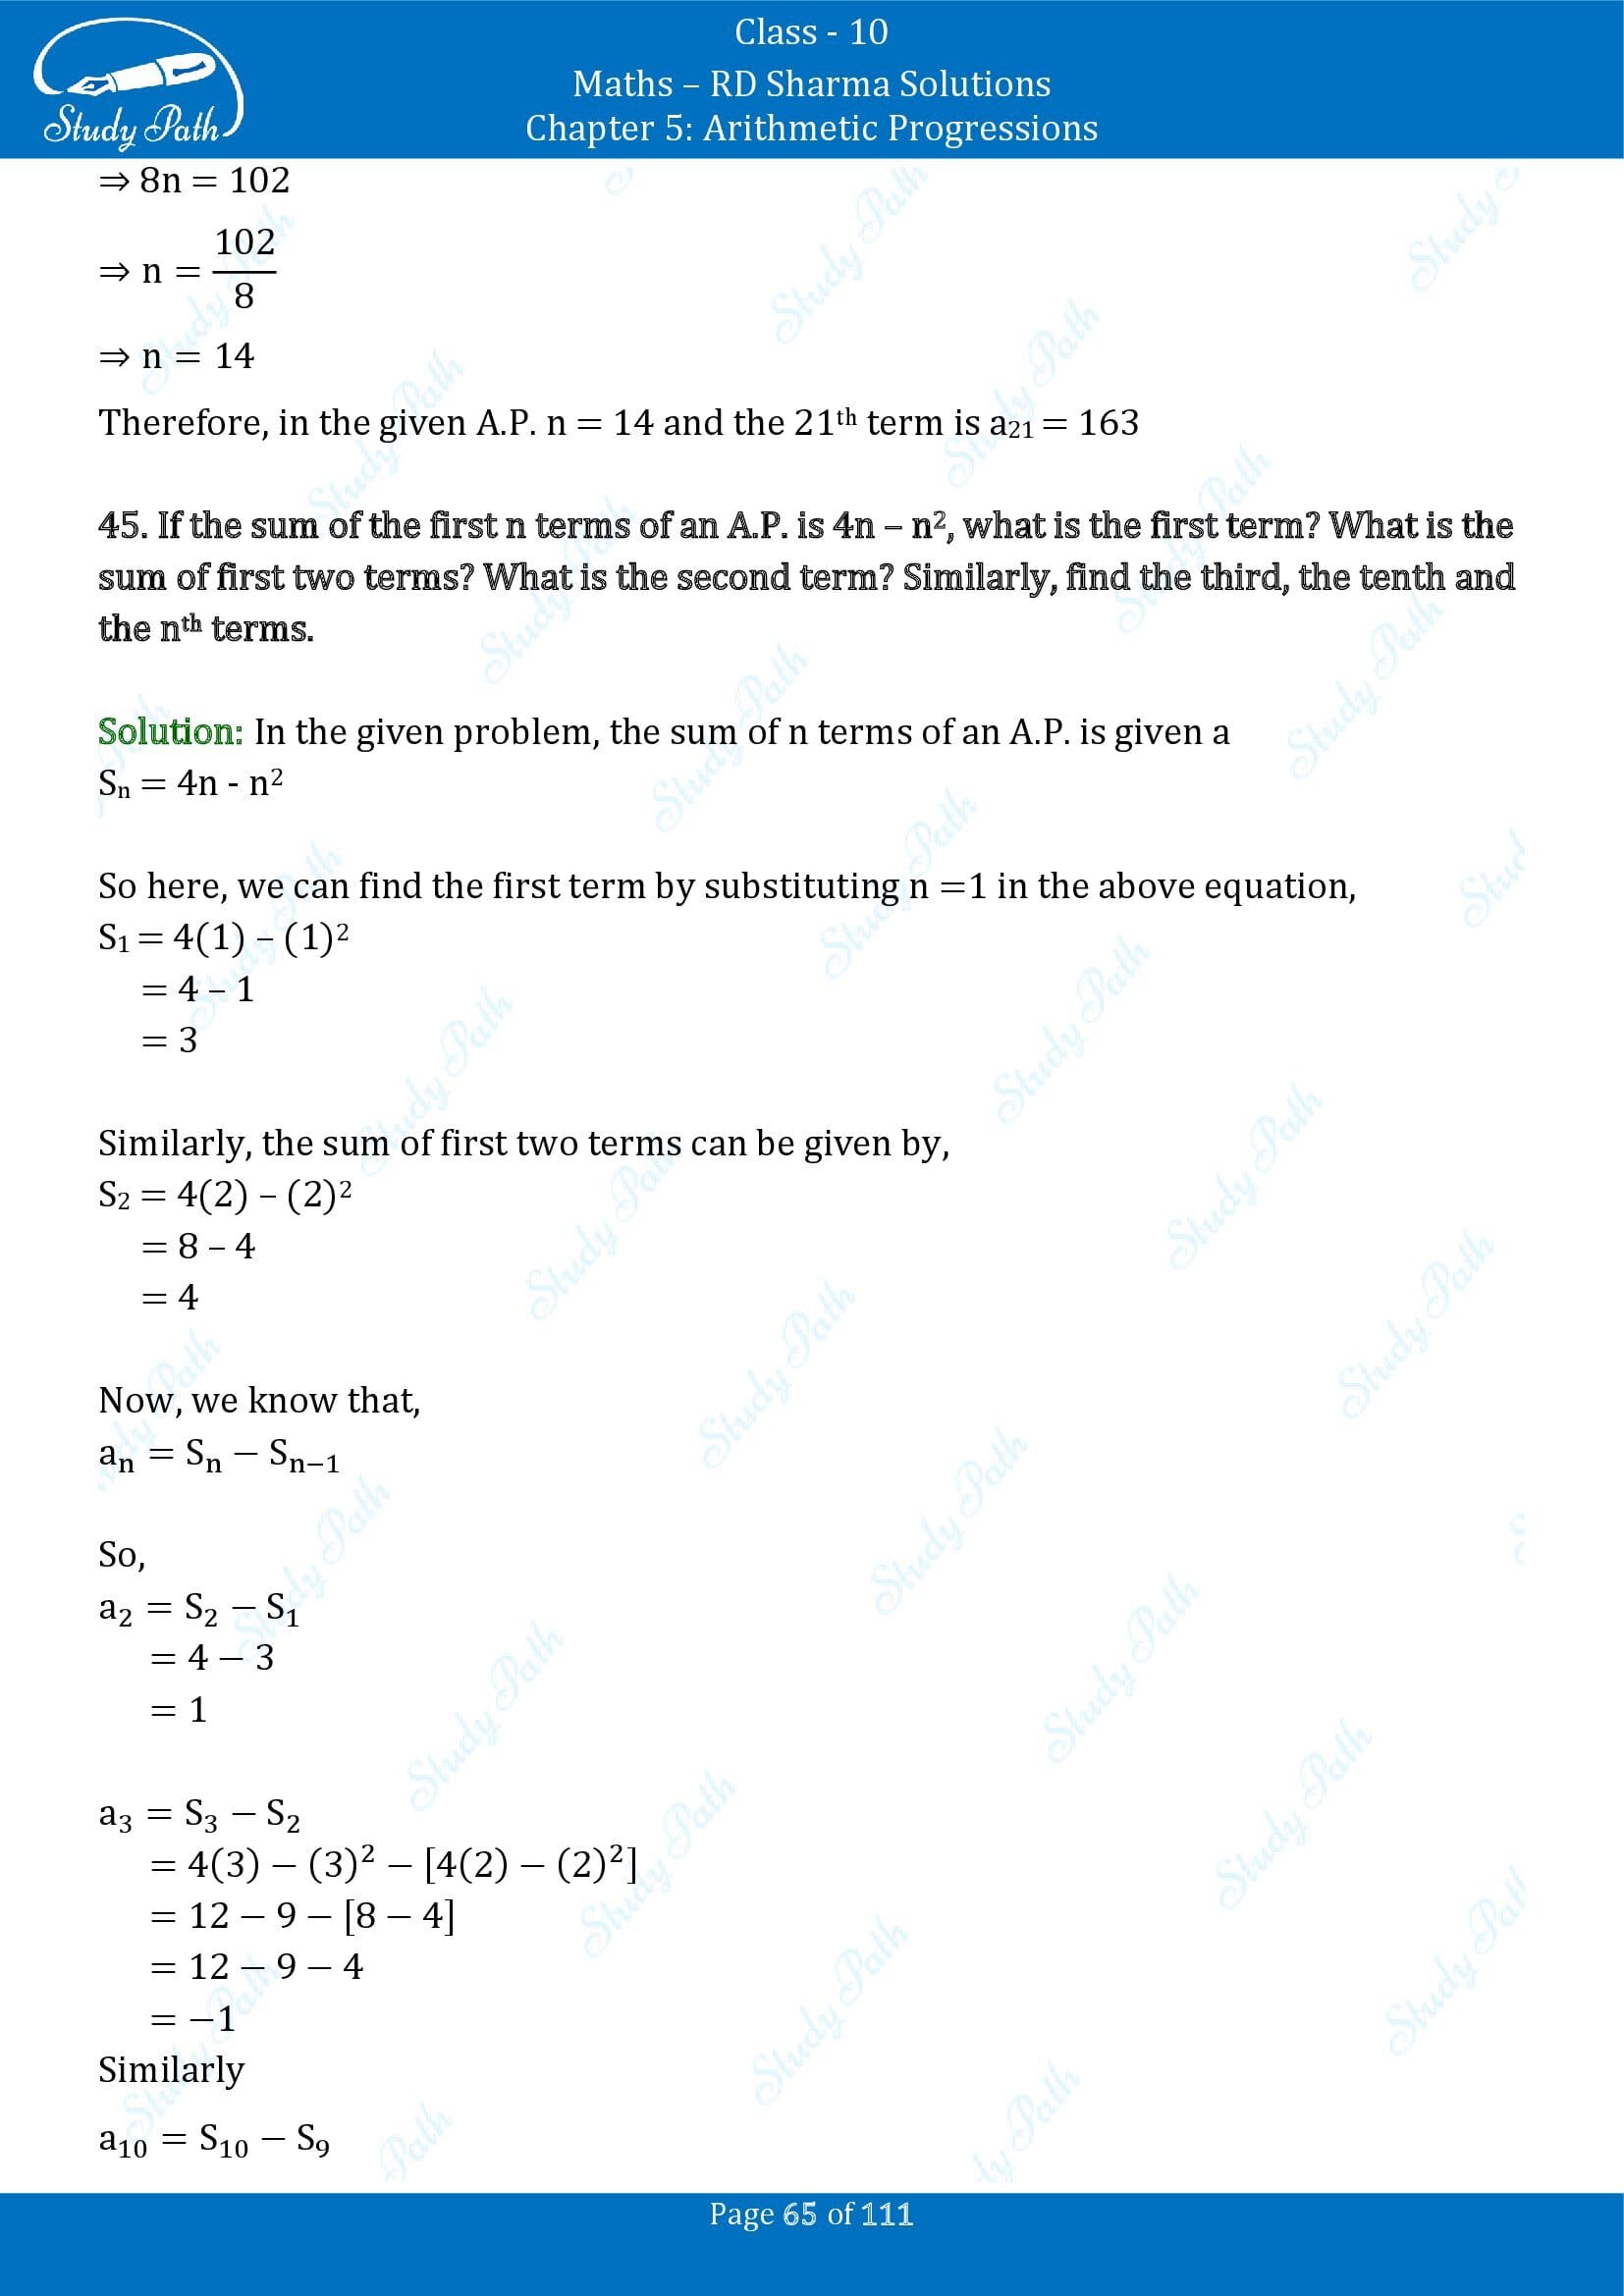 RD Sharma Solutions Class 10 Chapter 5 Arithmetic Progressions Exercise 5.6 00065